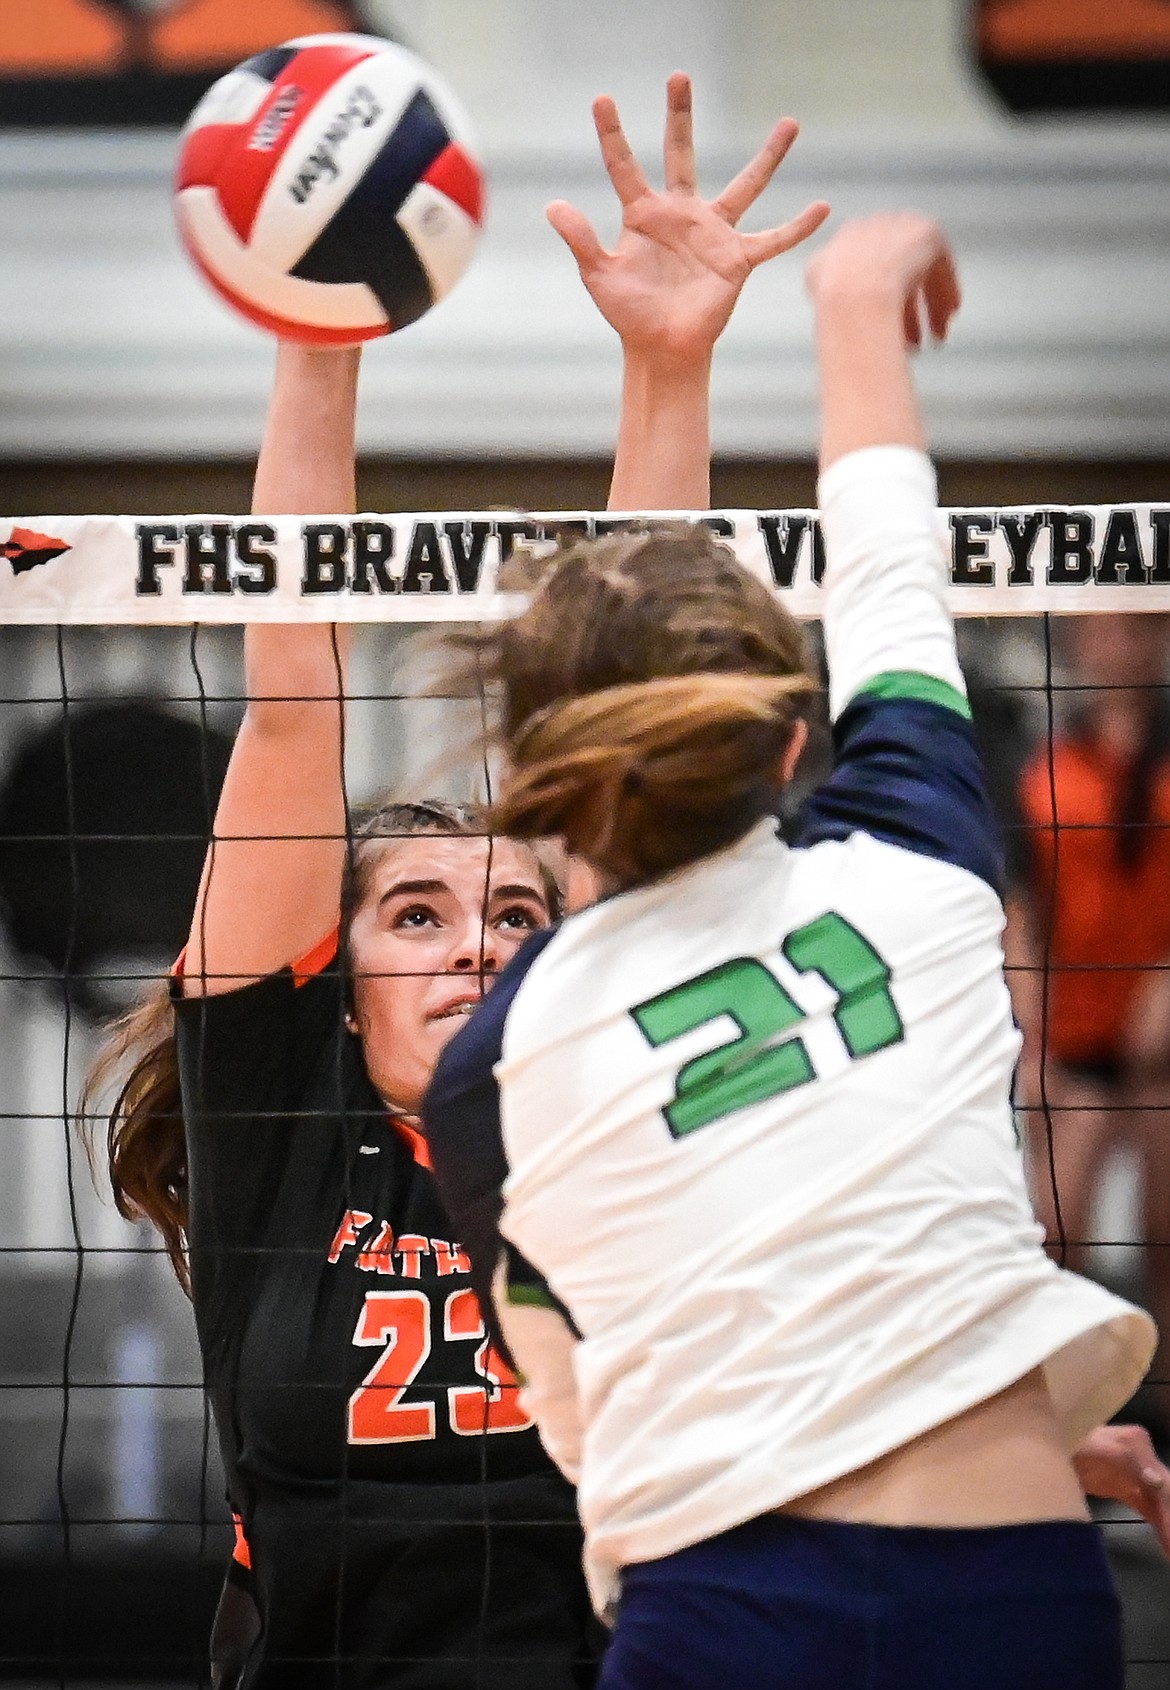 Flathead's Sienna Sterck (23) goes up for a block against Glacier's Kaylei Fant (21) during crosstown volleyball at Flathead High School on Thursday, Sept. 29. (Casey Kreider/Daily Inter Lake)